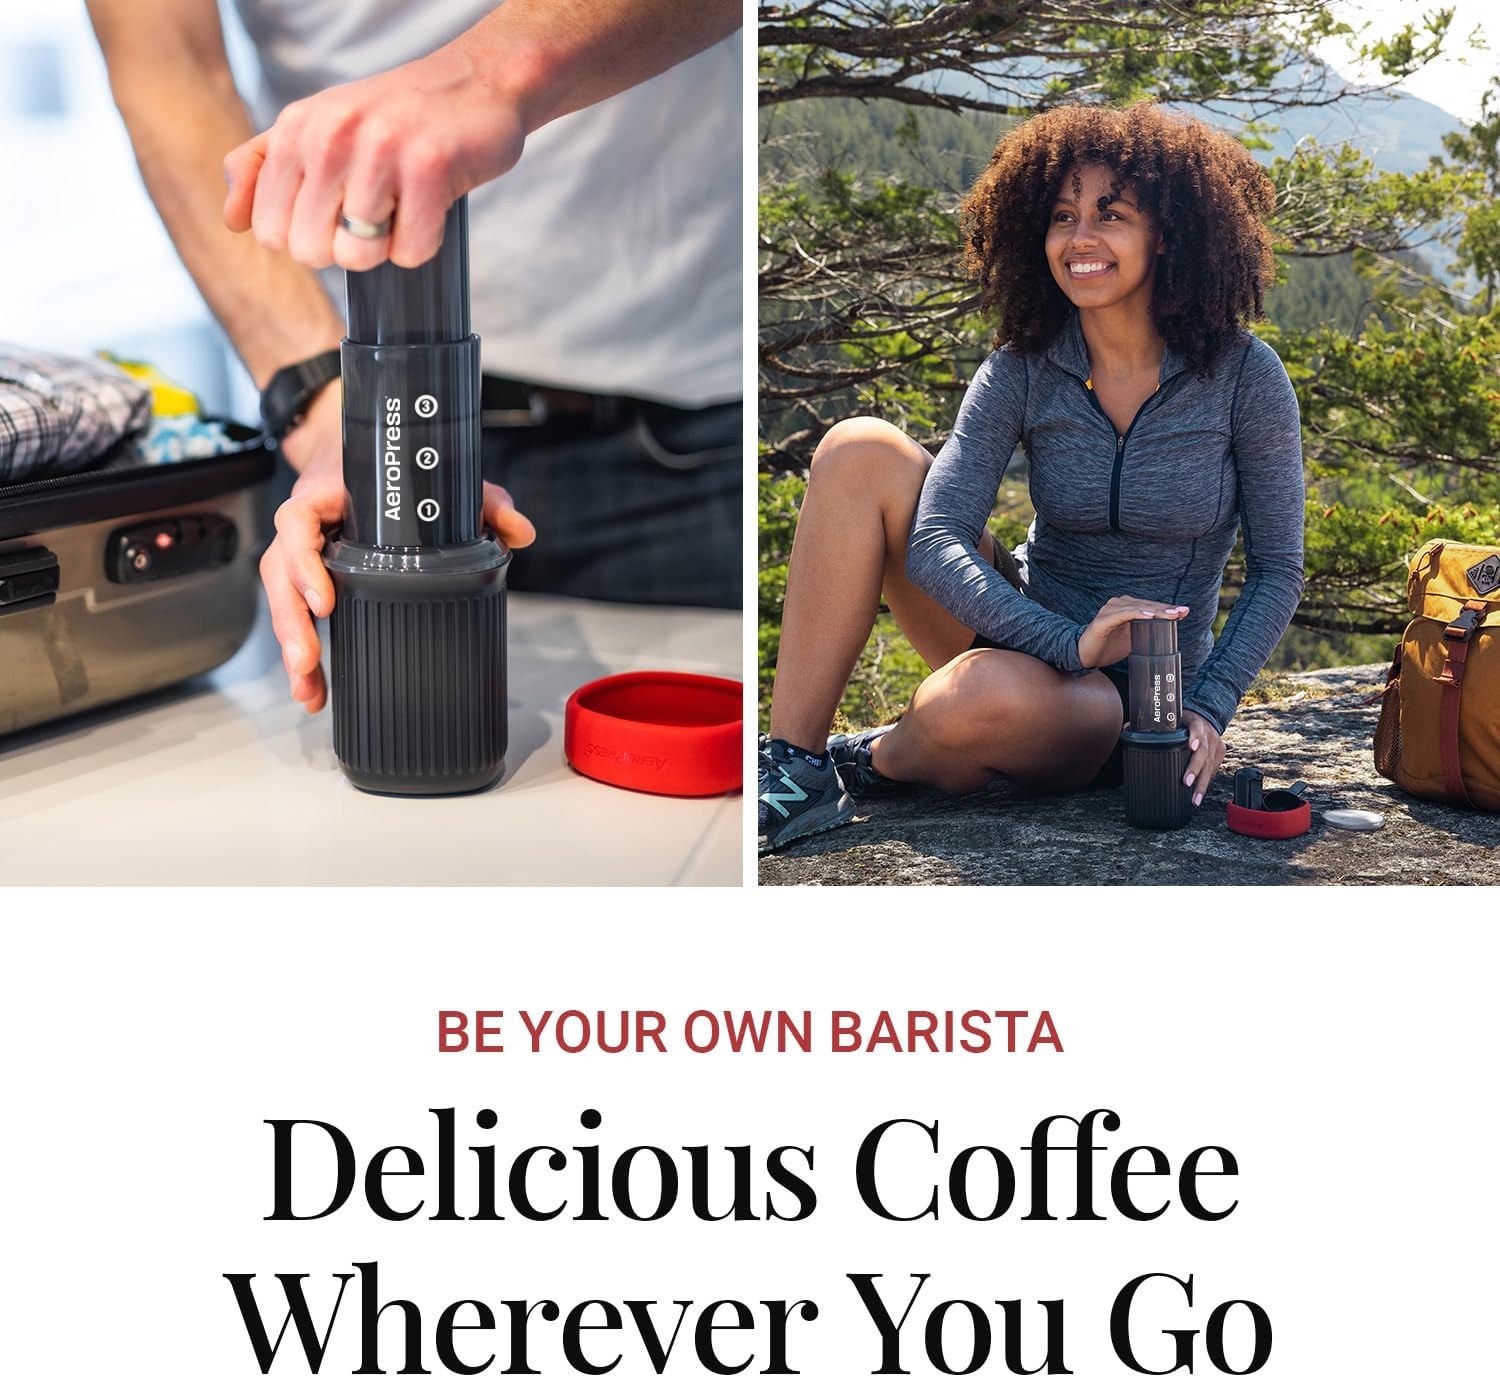 Aeropress Go Travel Coffee Press Kit - 3 in 1 brew method combines French Press, Pourover, Espresso - without grit or bitterness - Small portable Full bodied coffee maker for camping  travel